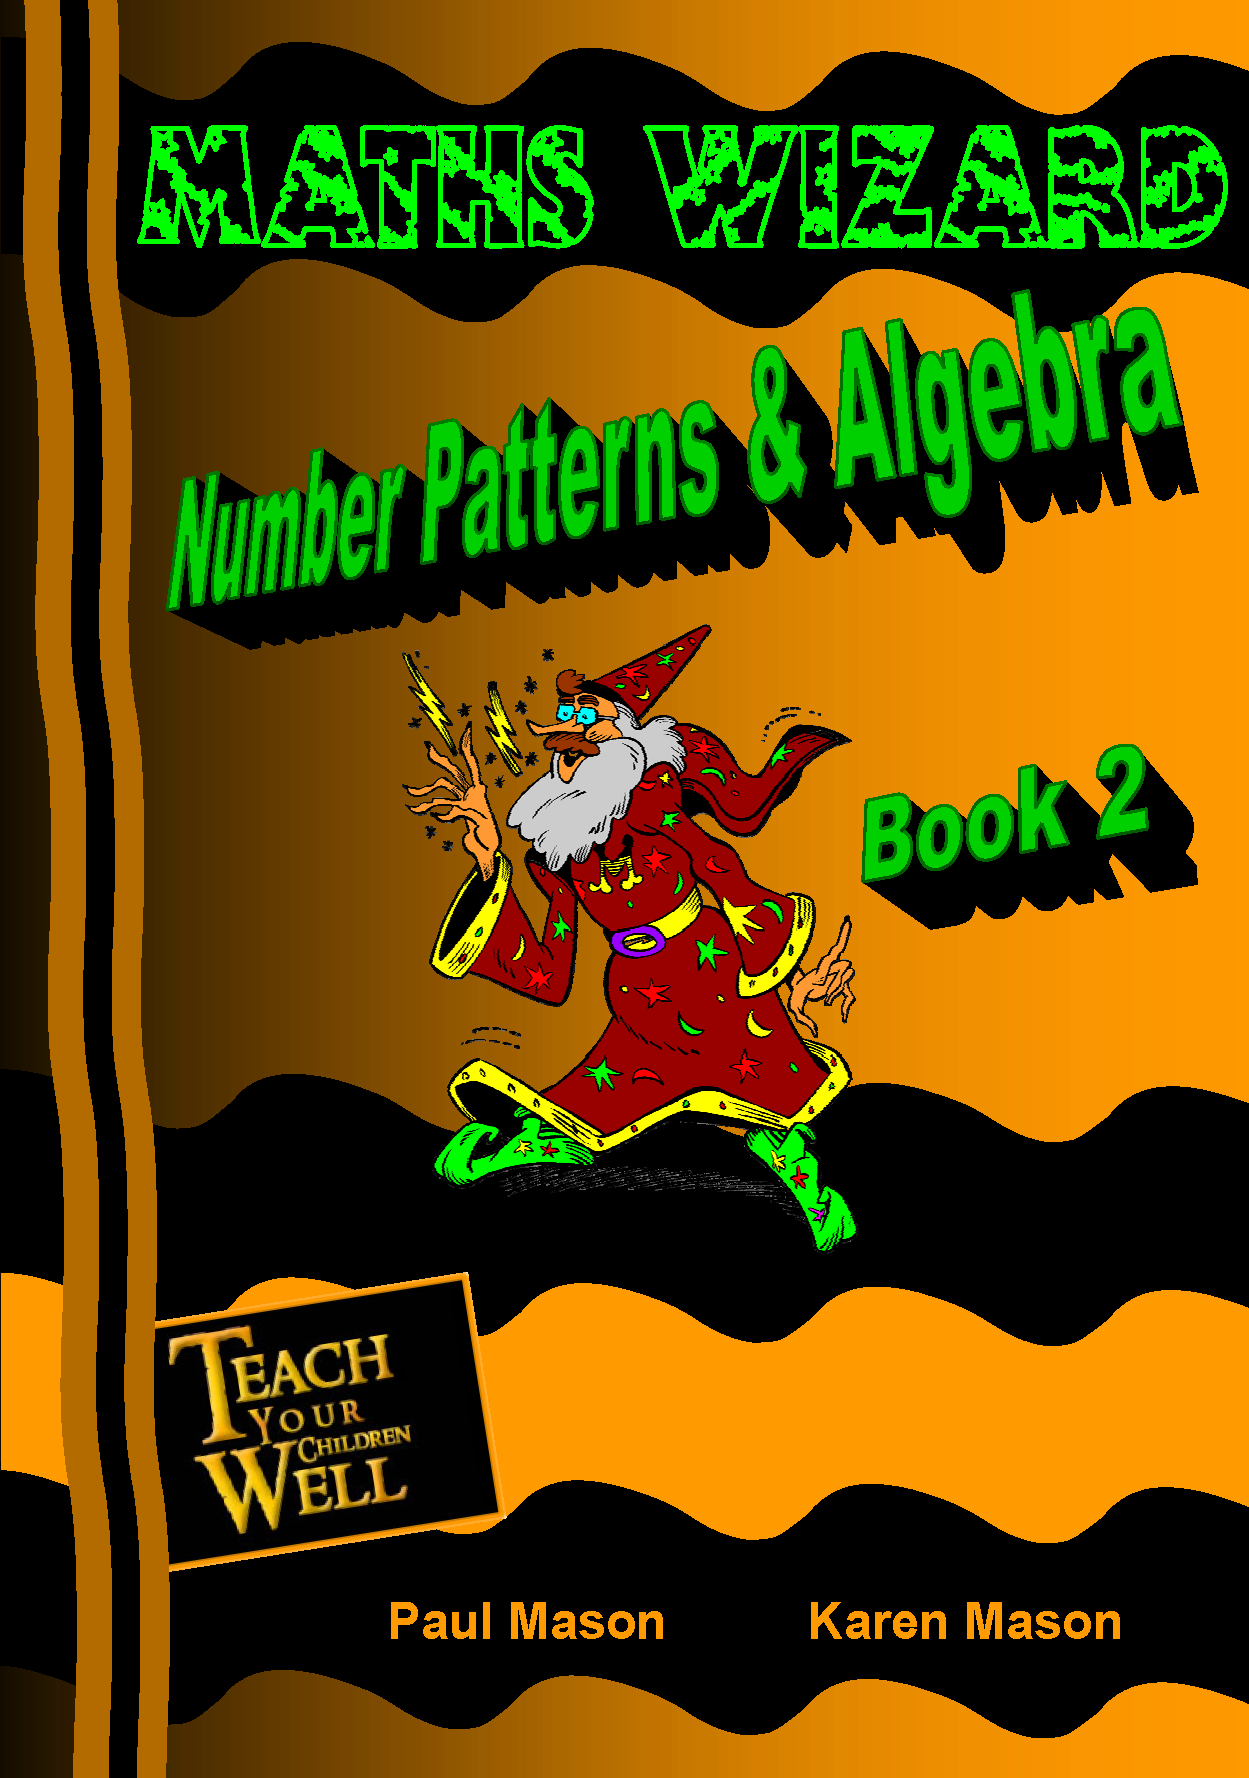 Number Patterns and Algebra 2